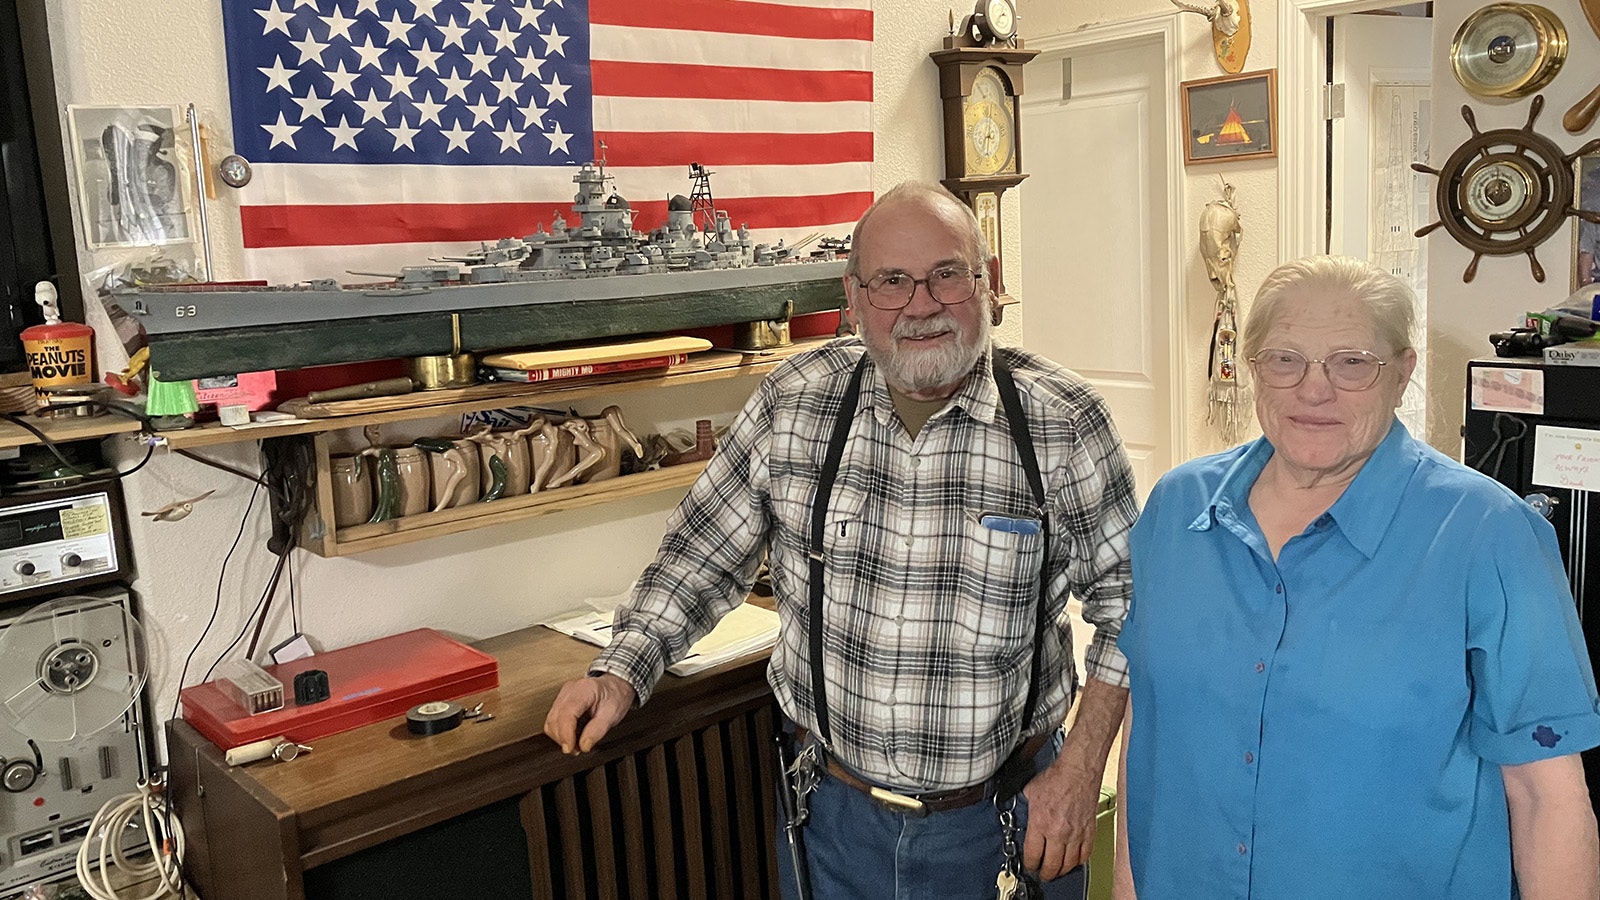 Midwest’s Gene and Eunice Dickerson have lived in Midwest, Wyoming for the past 14 years and made their property into U.S. Navy museum.